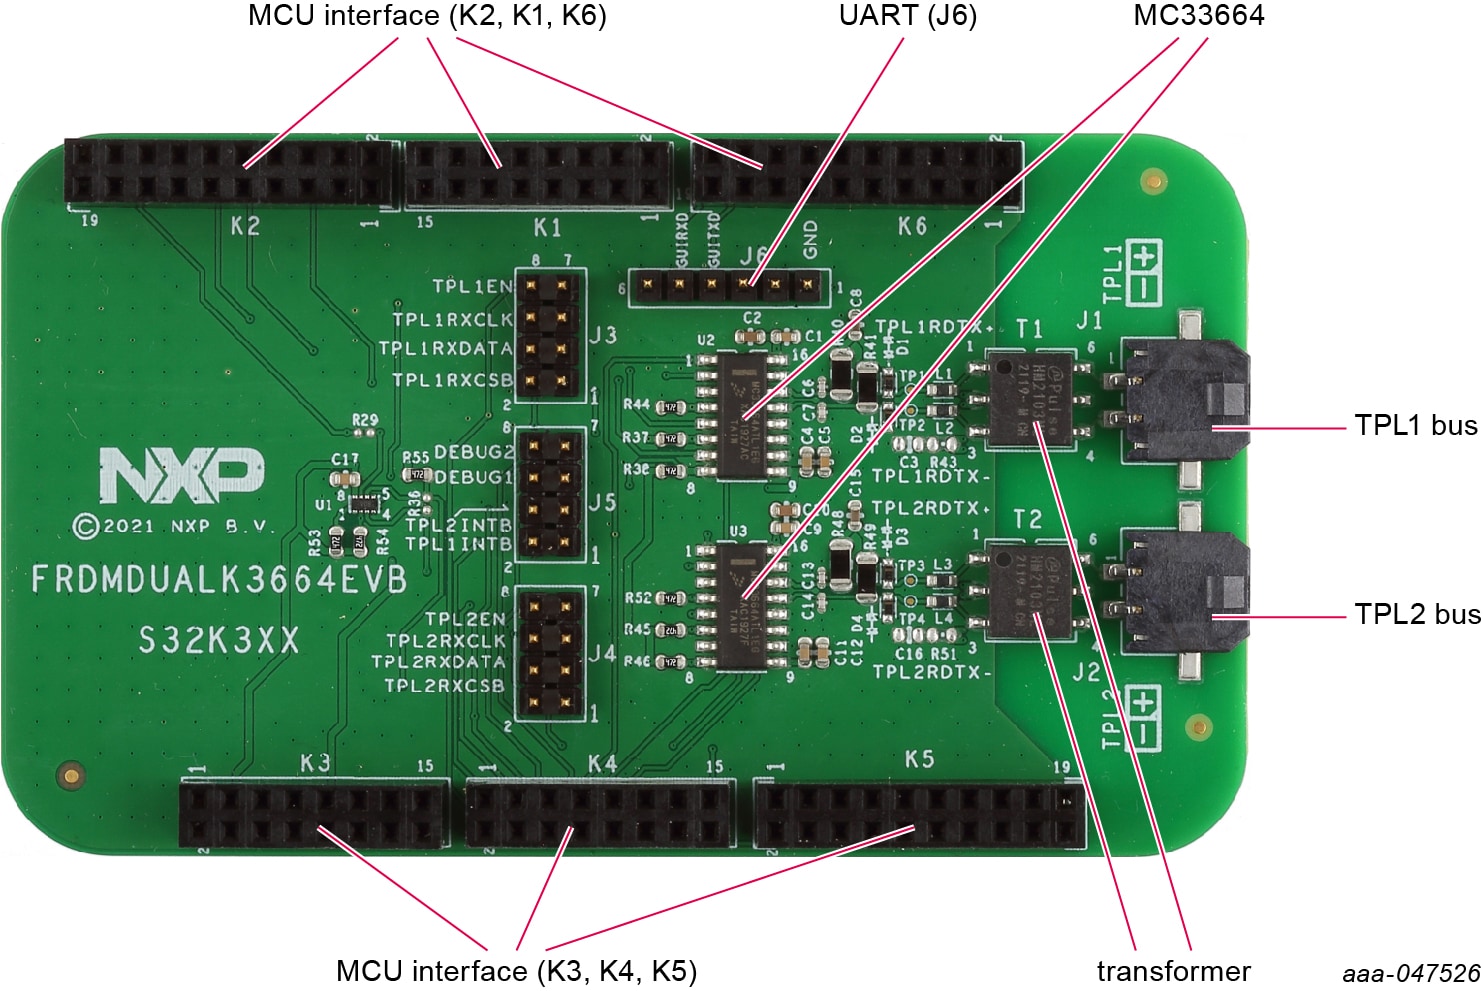 Overview of the FRDMDUALK3664EVB board